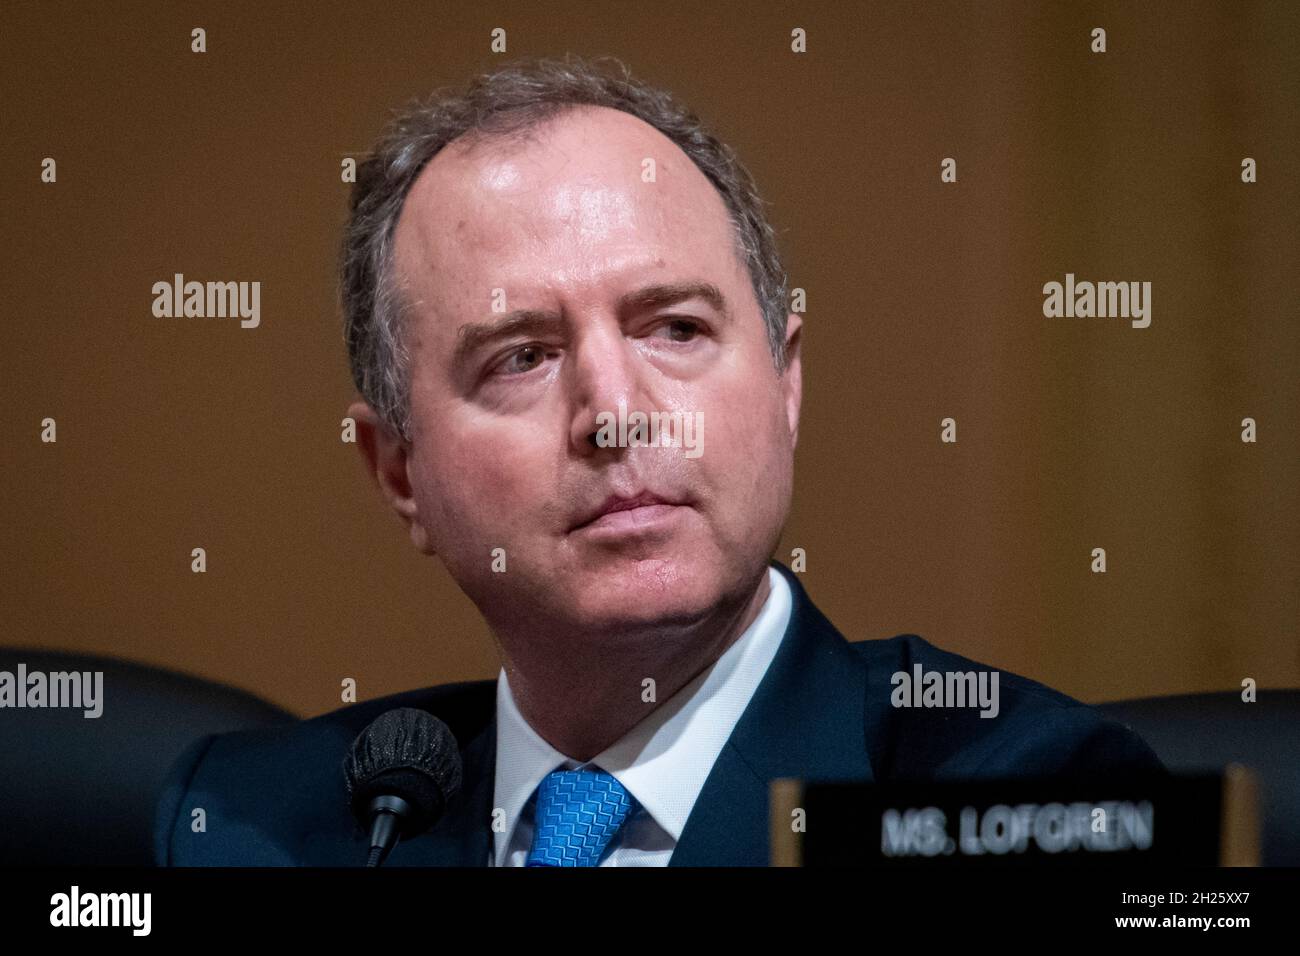 Washington, United States Of America. 19th Oct, 2021. United States Representative Adam Schiff (Democrat of California) listens as the House select committee tasked with investigating the January 6th attack on the Capitol meets to hold one of former President Donald Trump's allies in contempt, former strategist Steve Bannon in the Canon House Office Building in Washington, DC, Tuesday, October 19, 2021. Credit: Rod Lamkey/CNP/Sipa USA Credit: Sipa USA/Alamy Live News Stock Photo